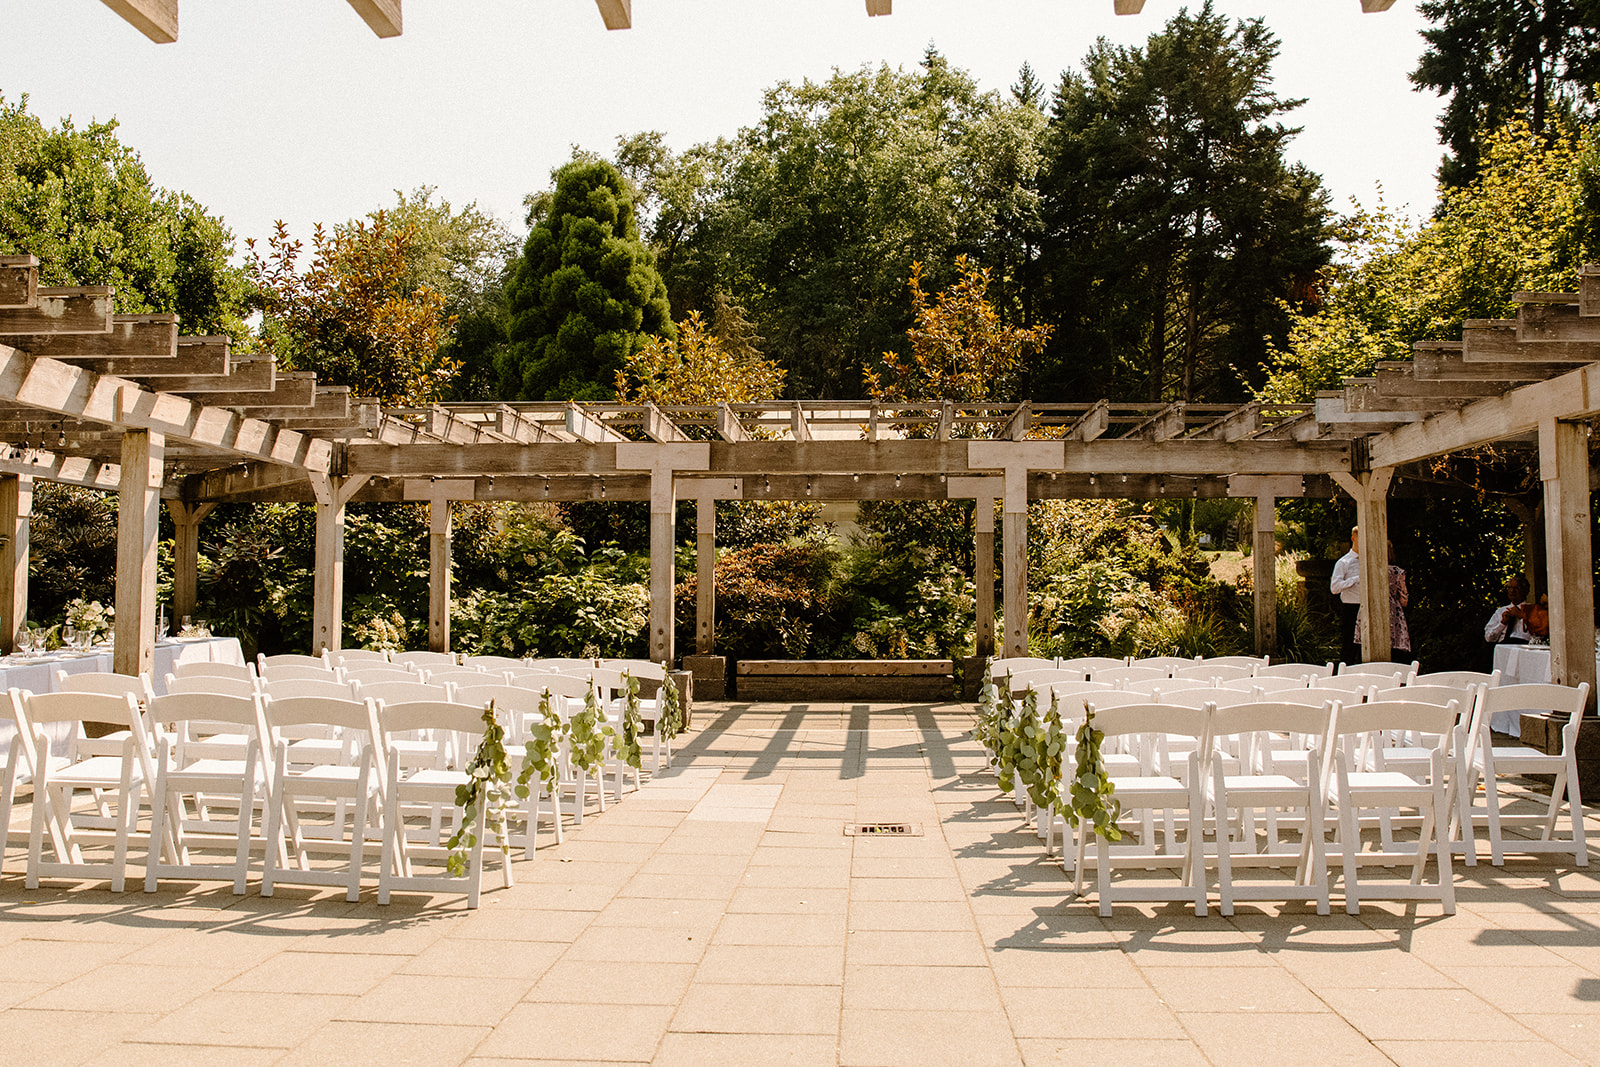 A beautiful garden Seattle Washington wedding with timeless black and white florals and colors.